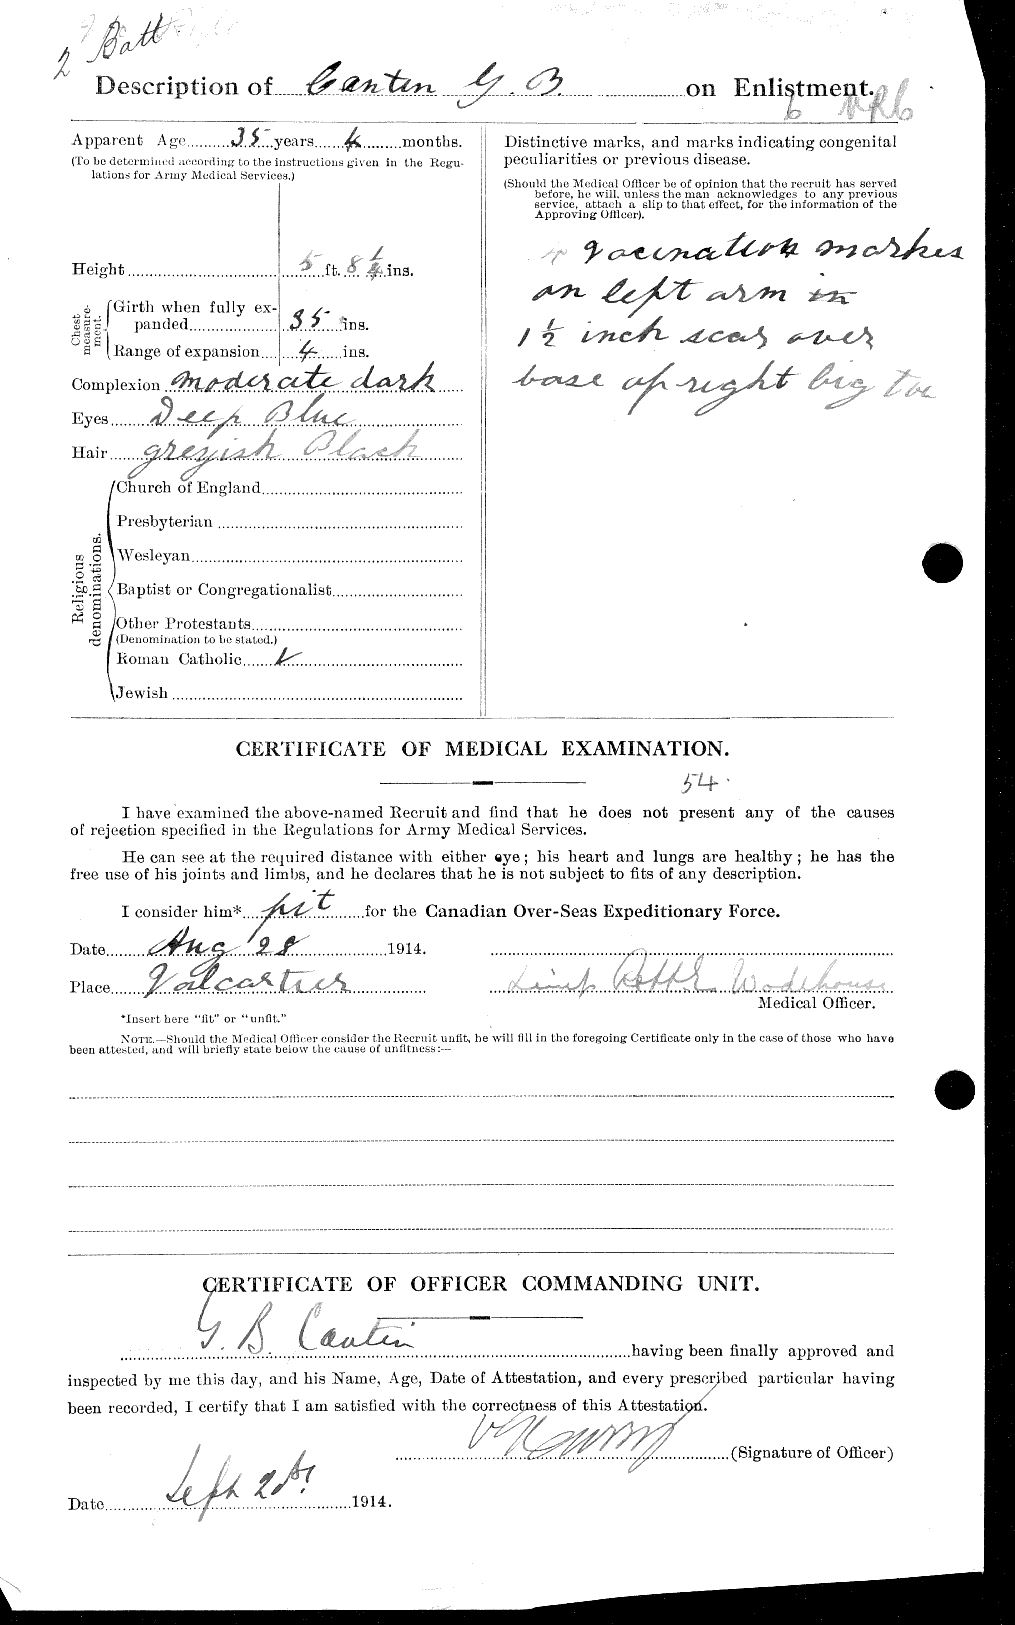 Personnel Records of the First World War - CEF 009058b